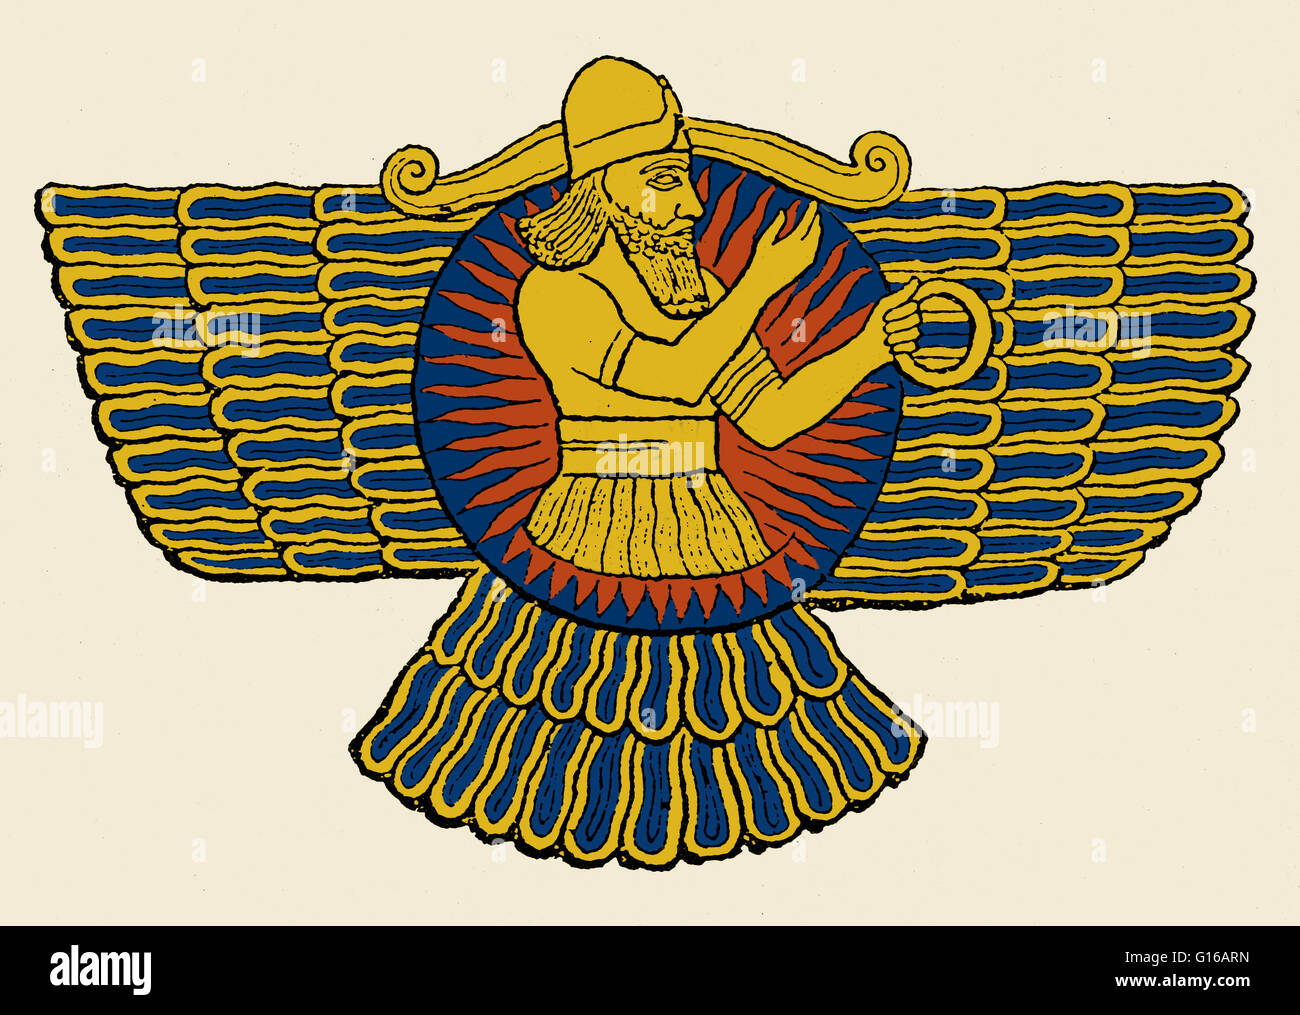 Illustration depicting Ashur, the god of the city of Ashur and national god of Assyria in the Mesopotamian religion. Stock Photo